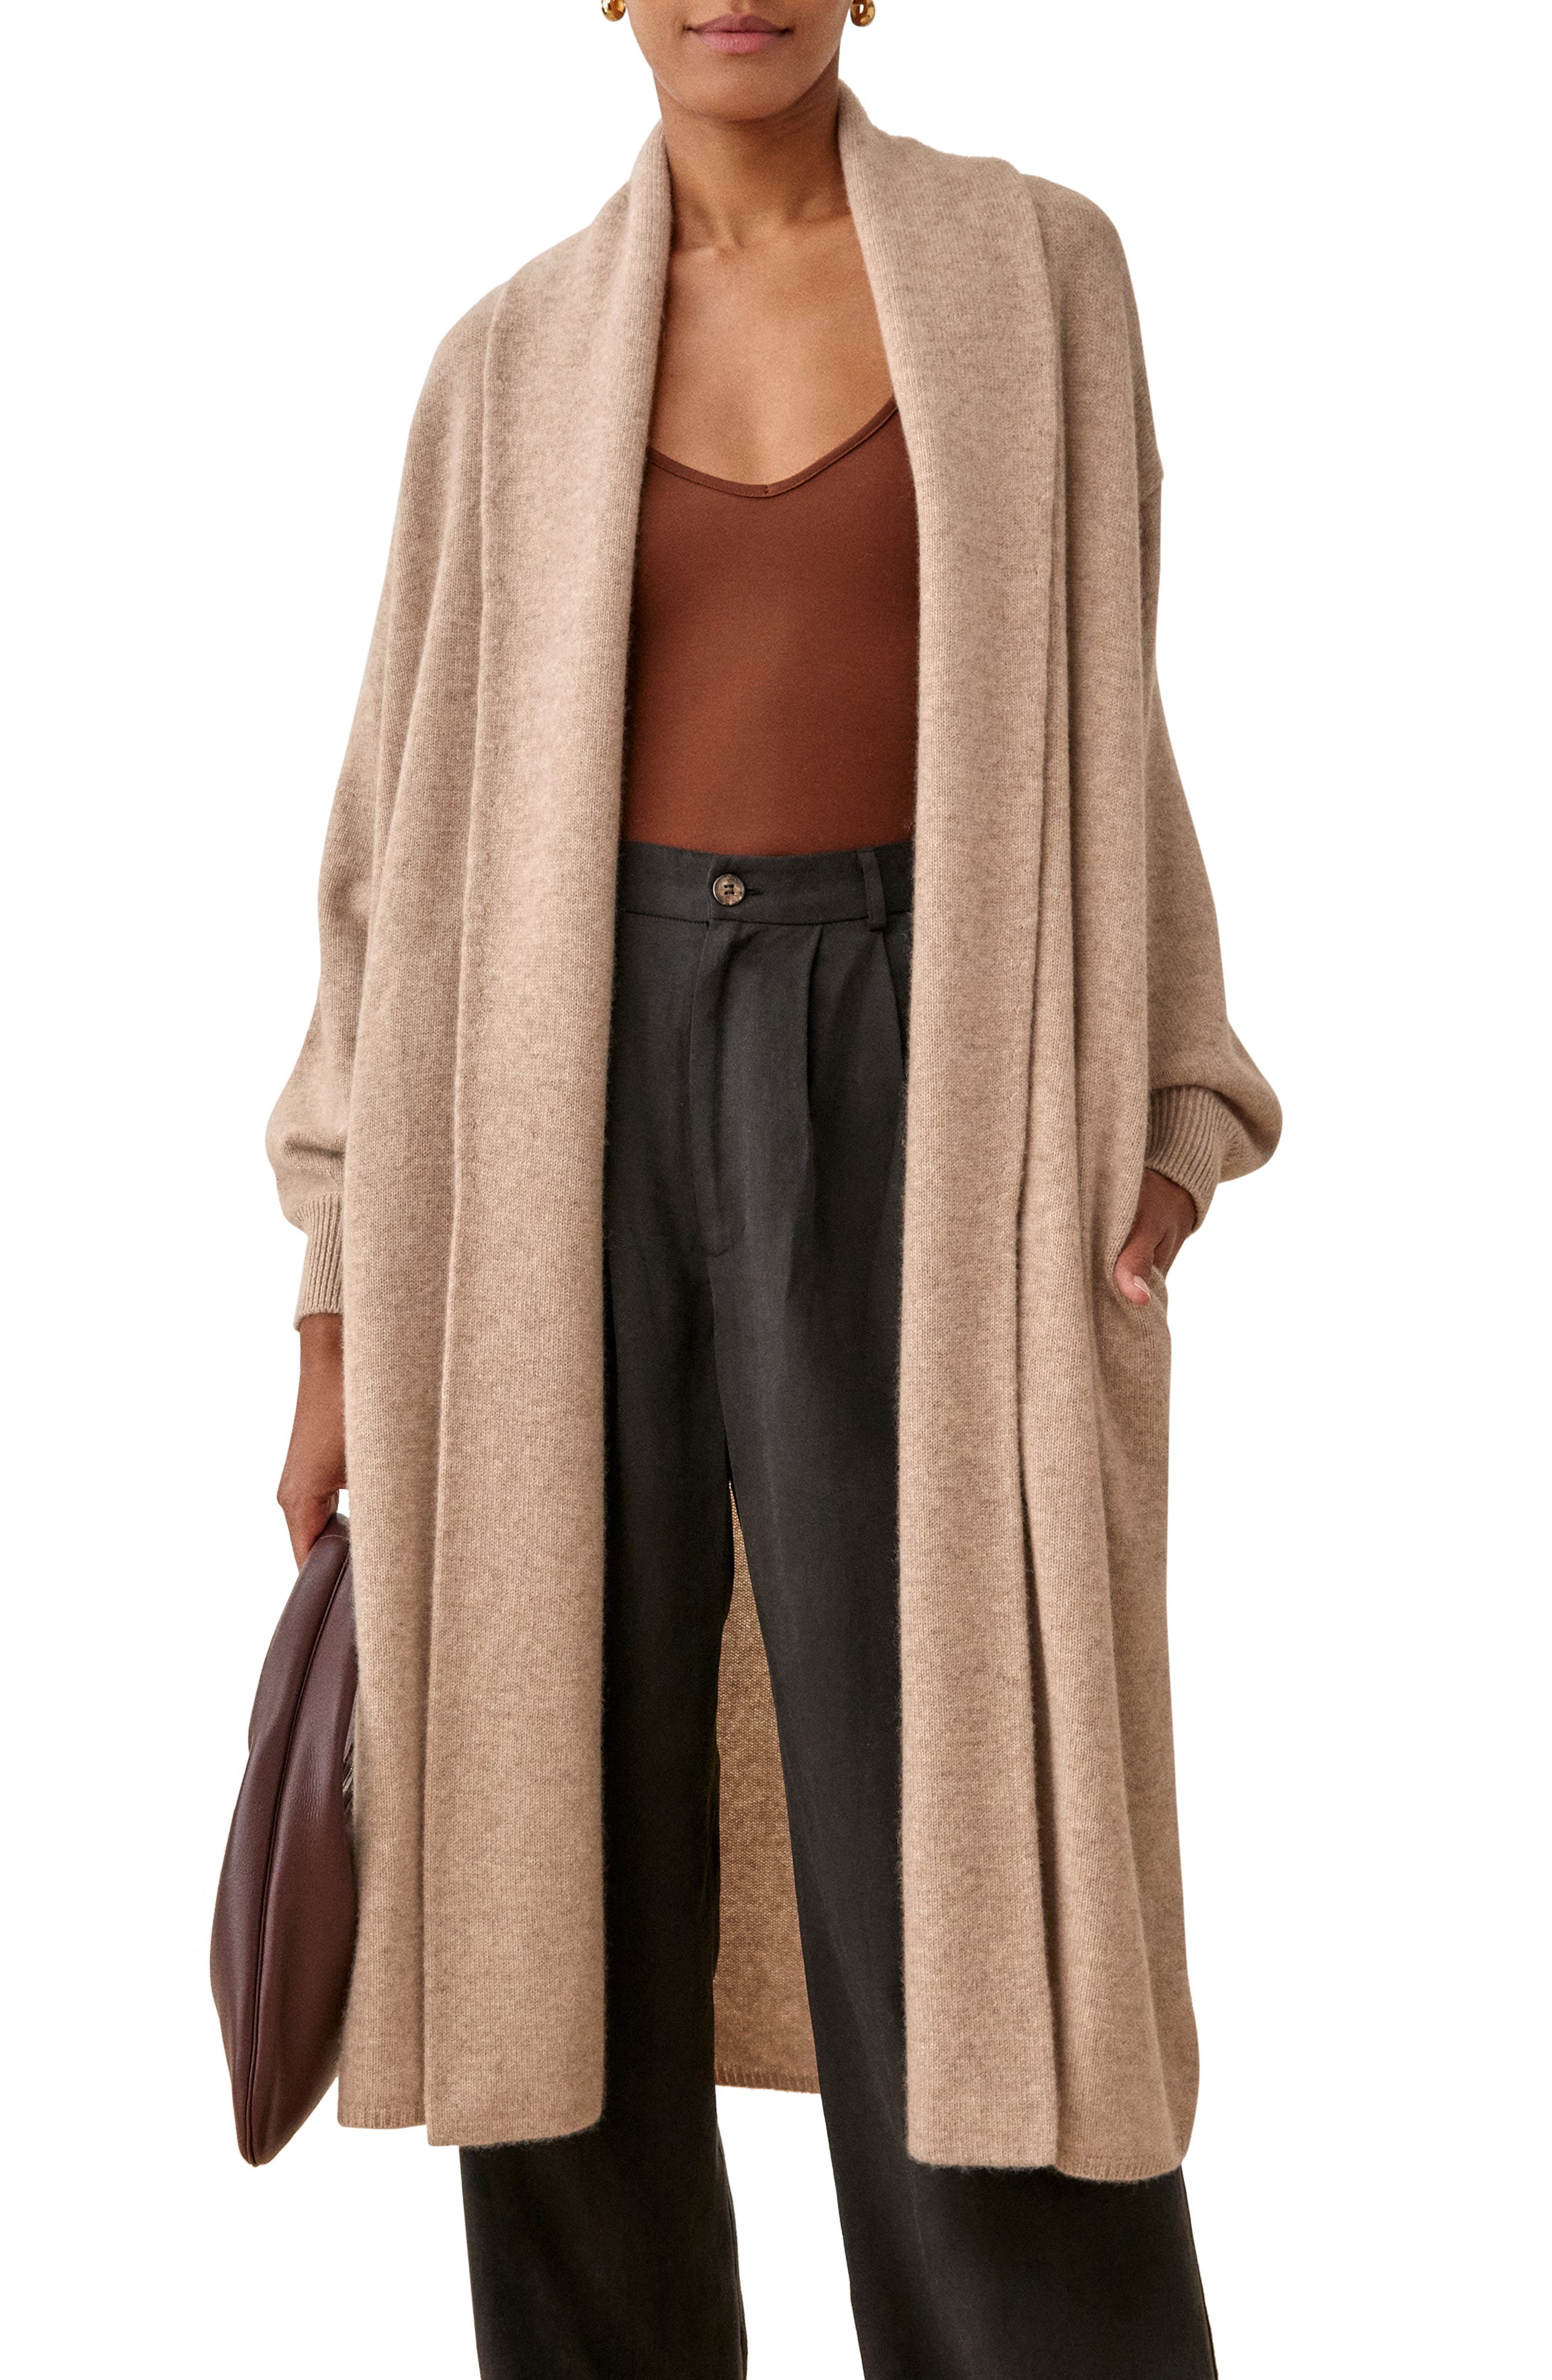 Reformation Liam Cashmere Long Cardigan in Oatmeal at Nordstrom, Size Large